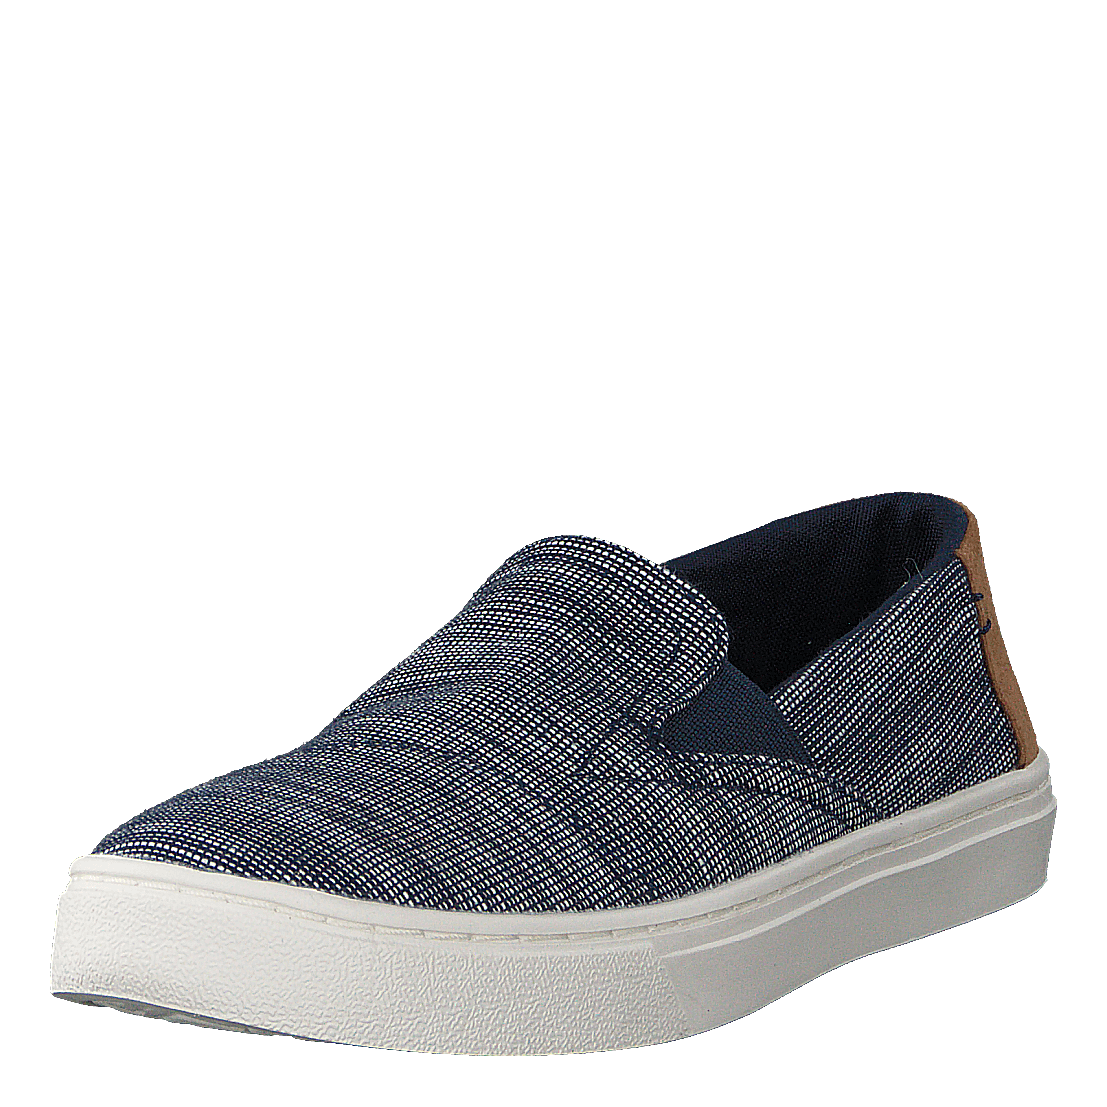 Luca Youth Navy Striped Chambray